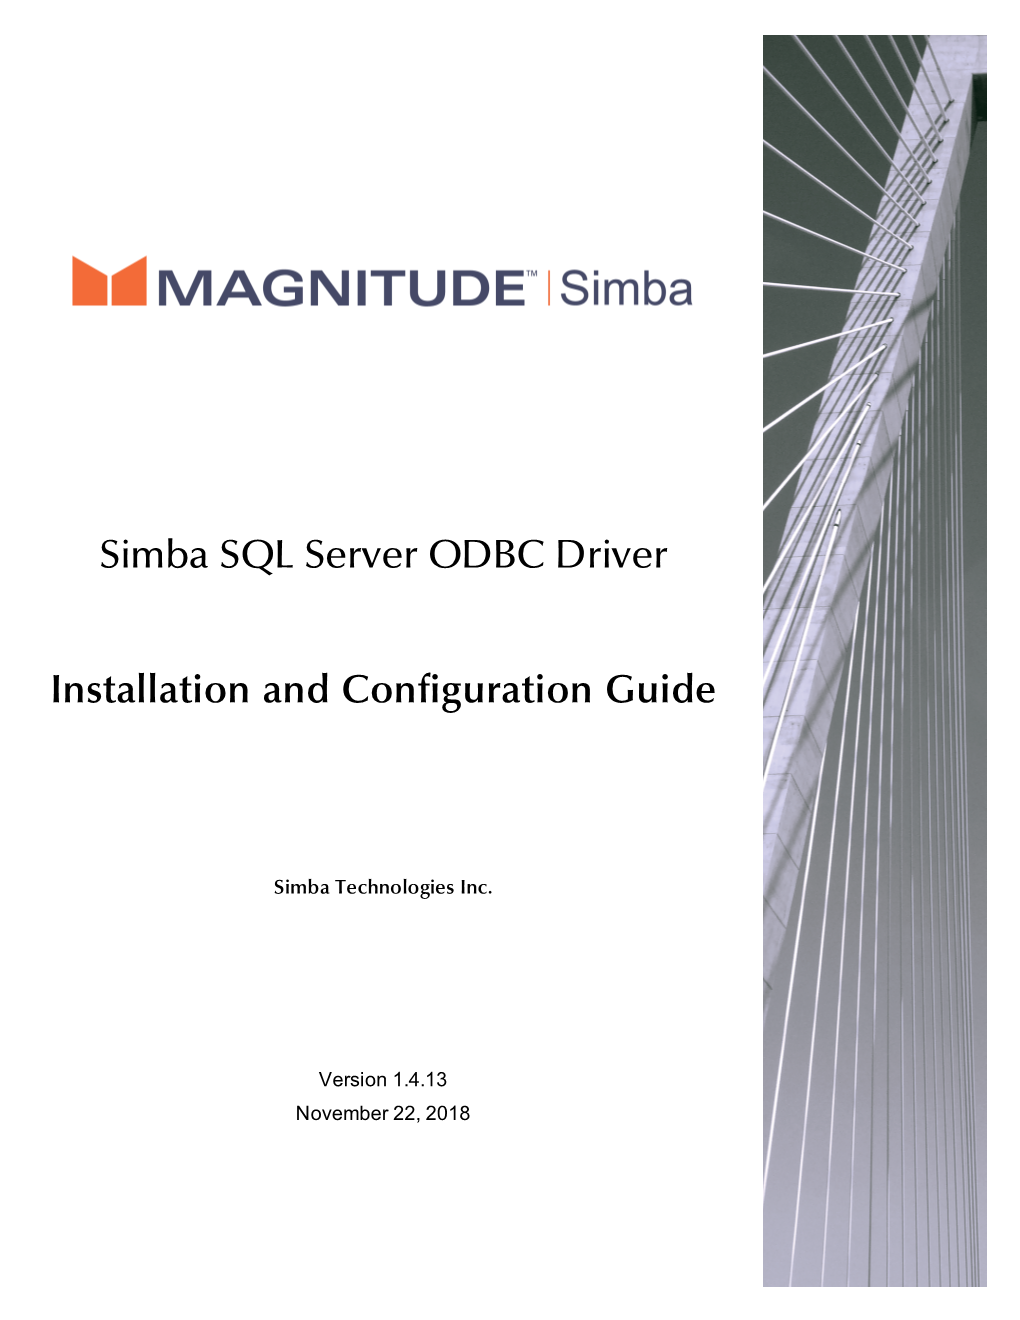 Simba SQL Server ODBC Driver Installation and Configuration Guide Explains How to Install and Configure the Simba SQL Server ODBC Driver